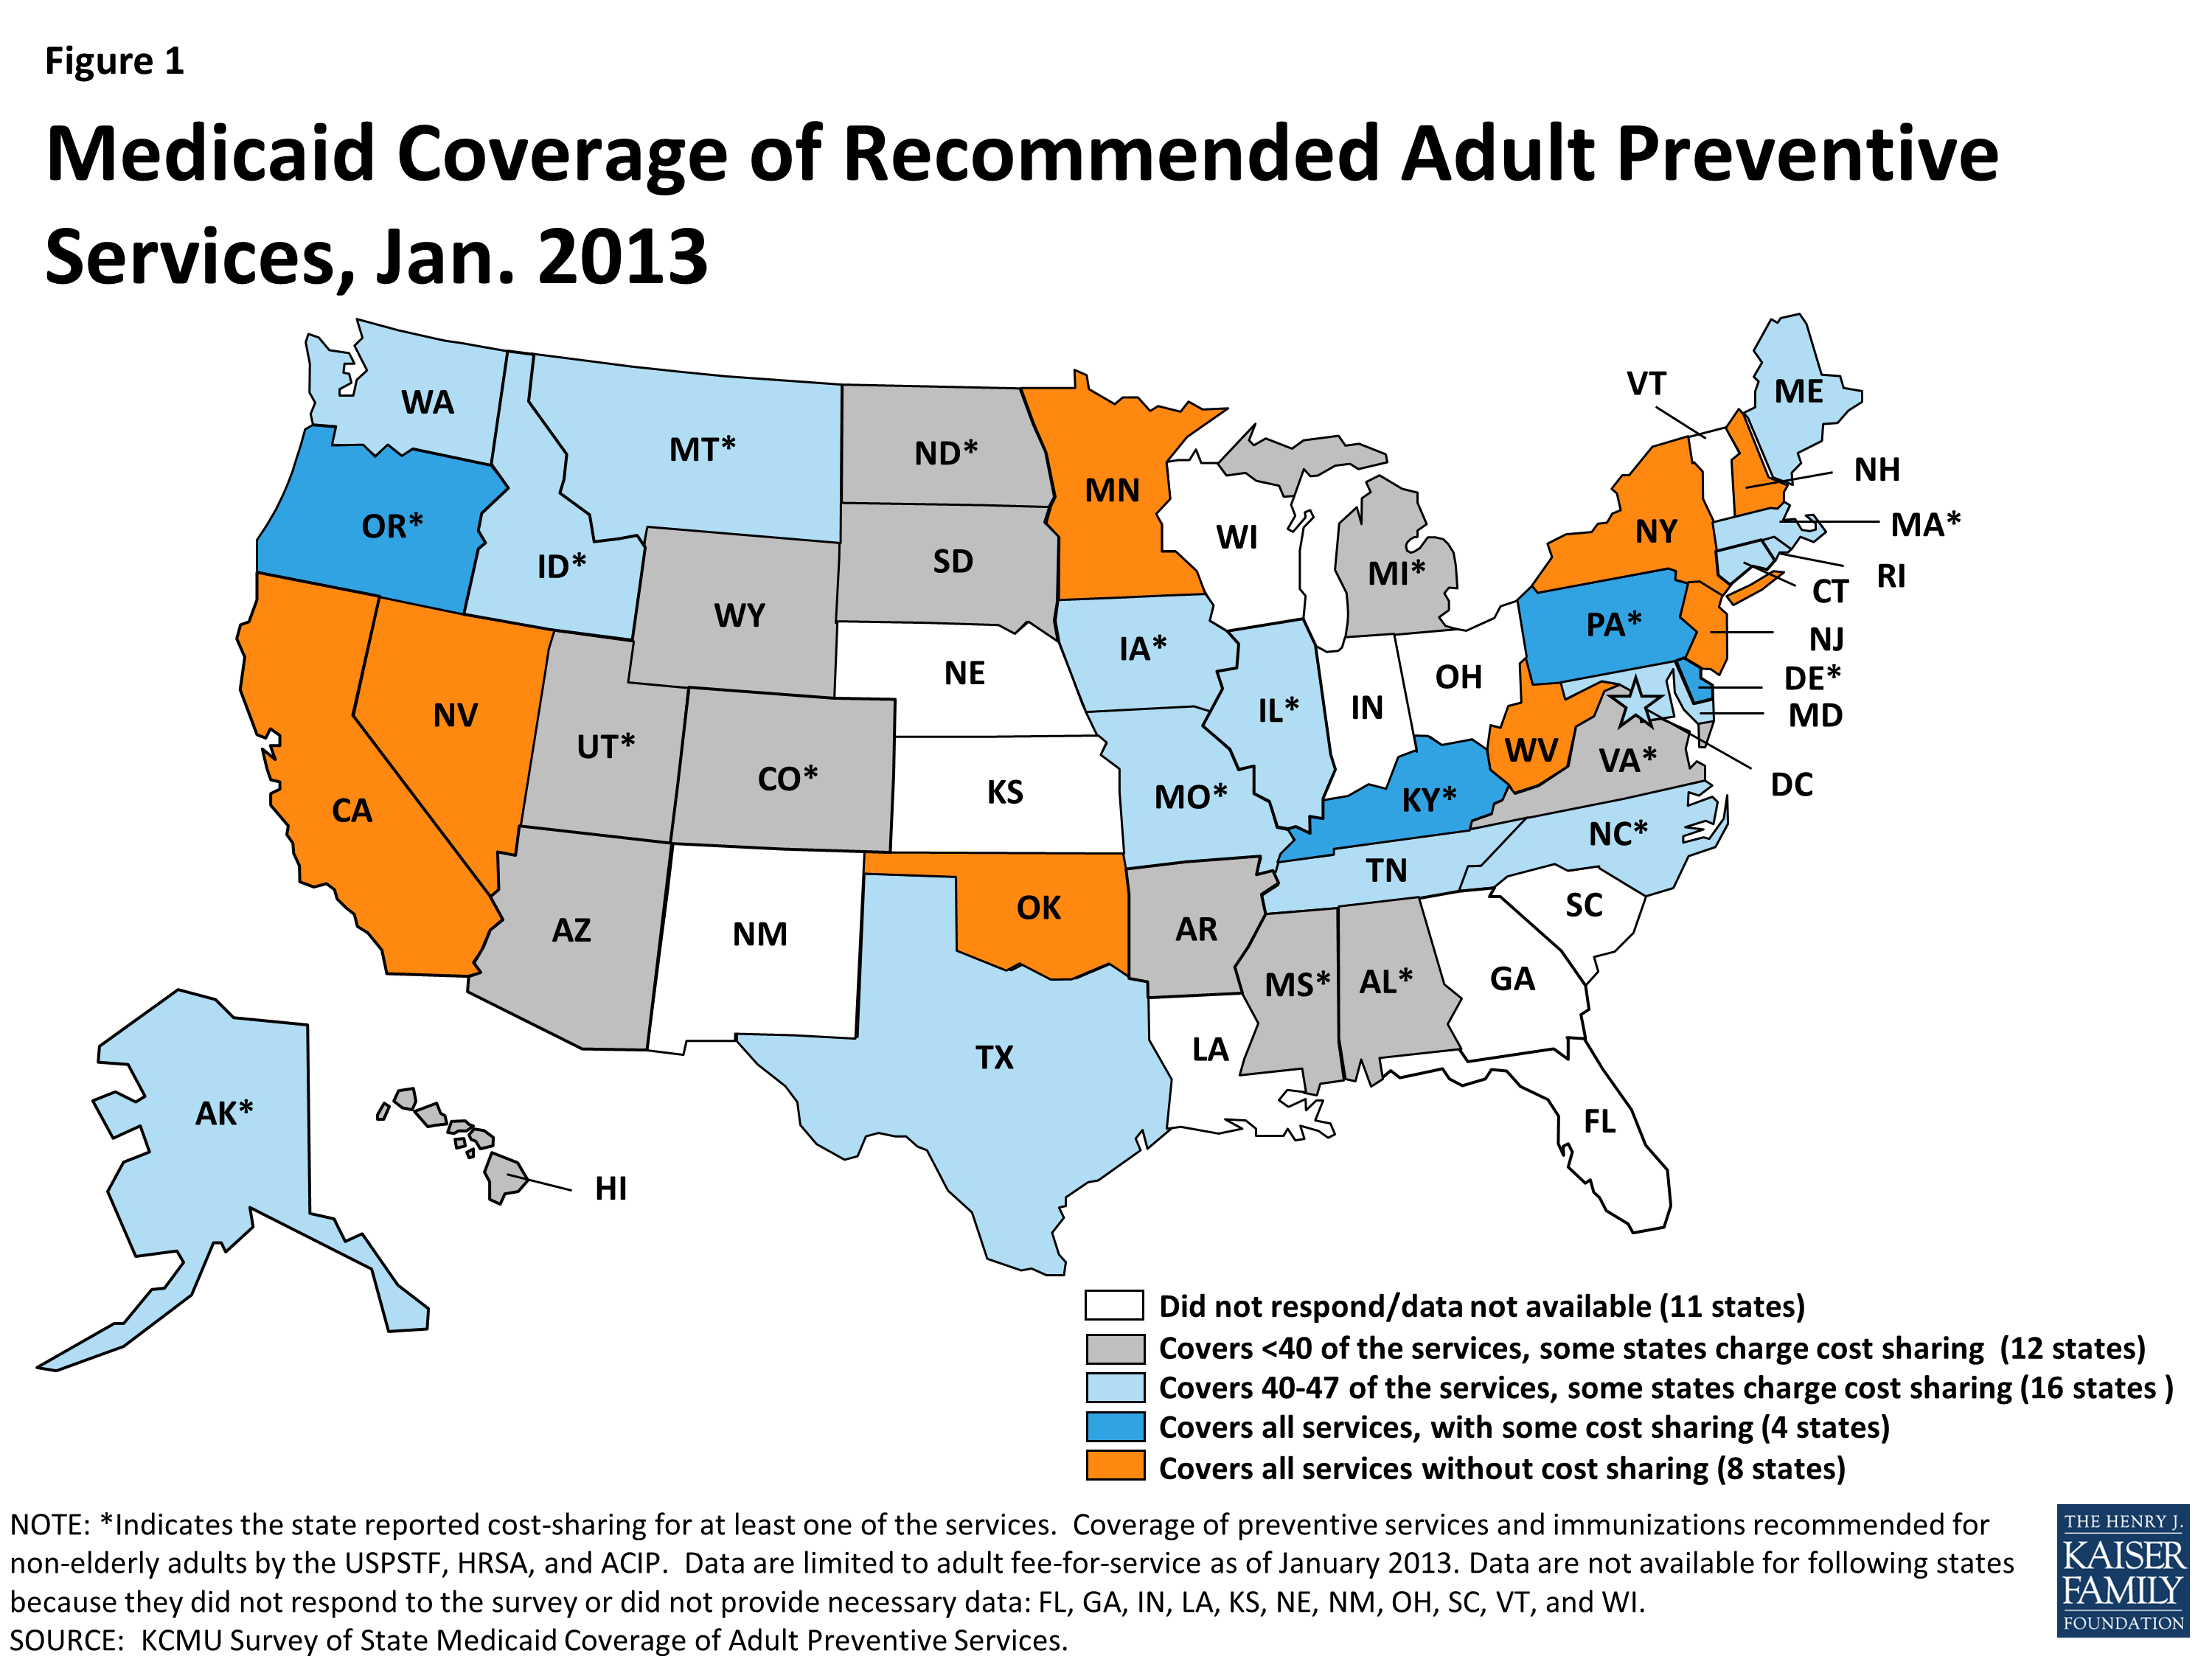 Coverage of Preventive Services for Adults in Medicaid